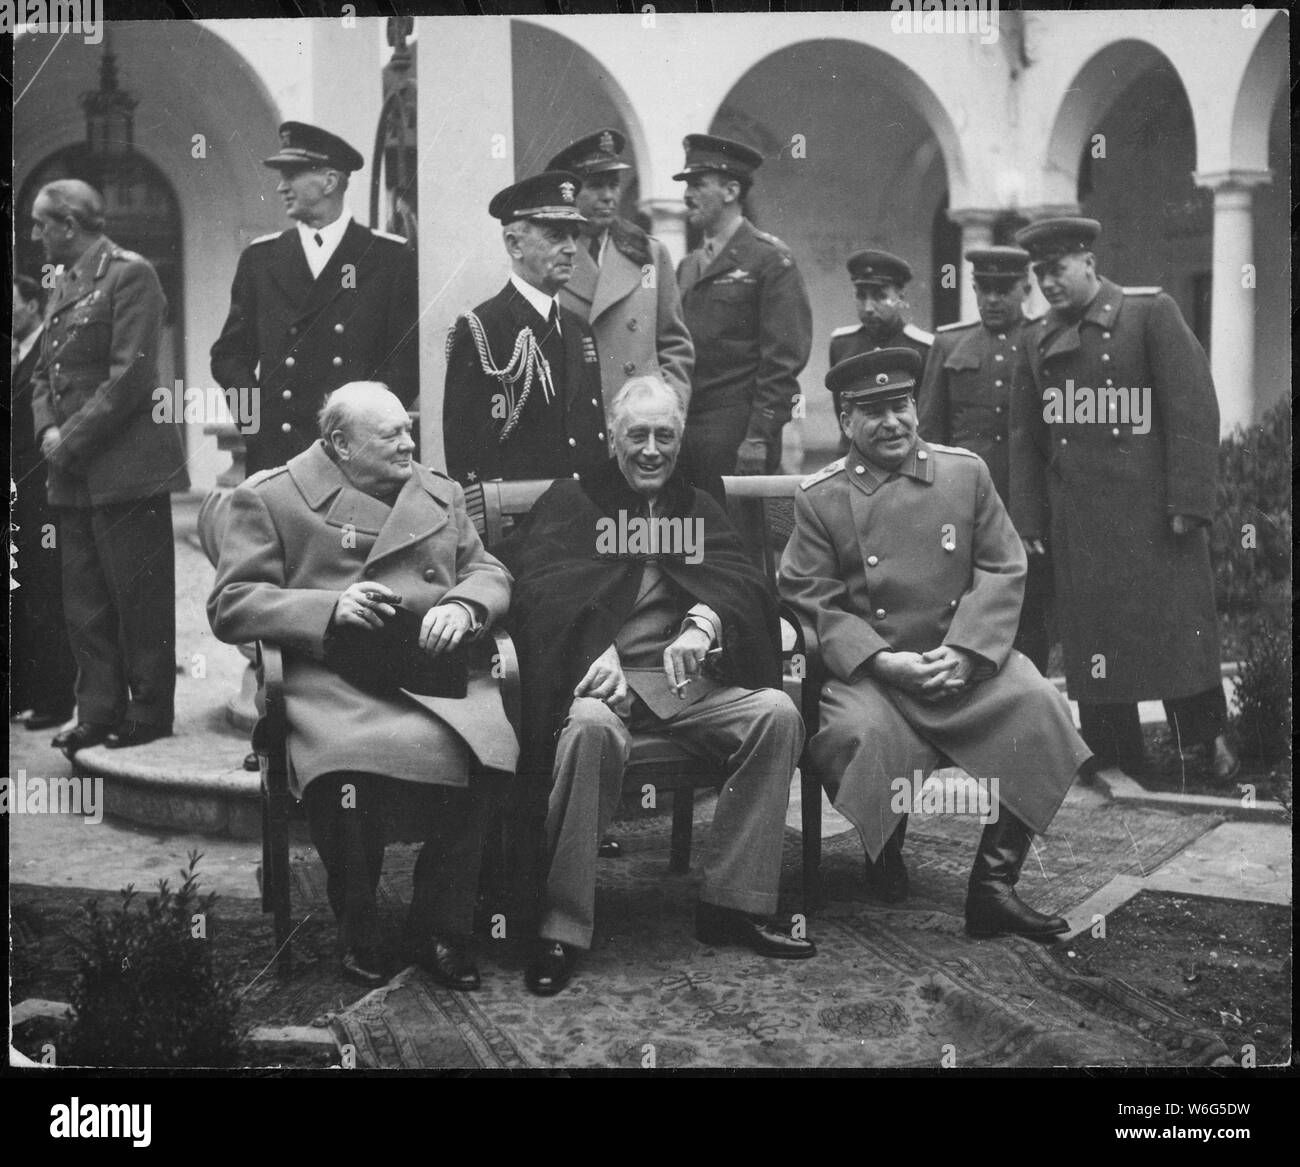 Conference of the Big Three at Yalta makes final plans for the defeat of Germany. Here the Big Three sit on the patio together, Prime Minister Winston S. Churchill, President Franklin D. Roosevelt, and Premier Josef Stalin., 02/1945; General notes:  Use War and Conflict Number 750 when ordering a reproduction or requesting information about this image. Stock Photo